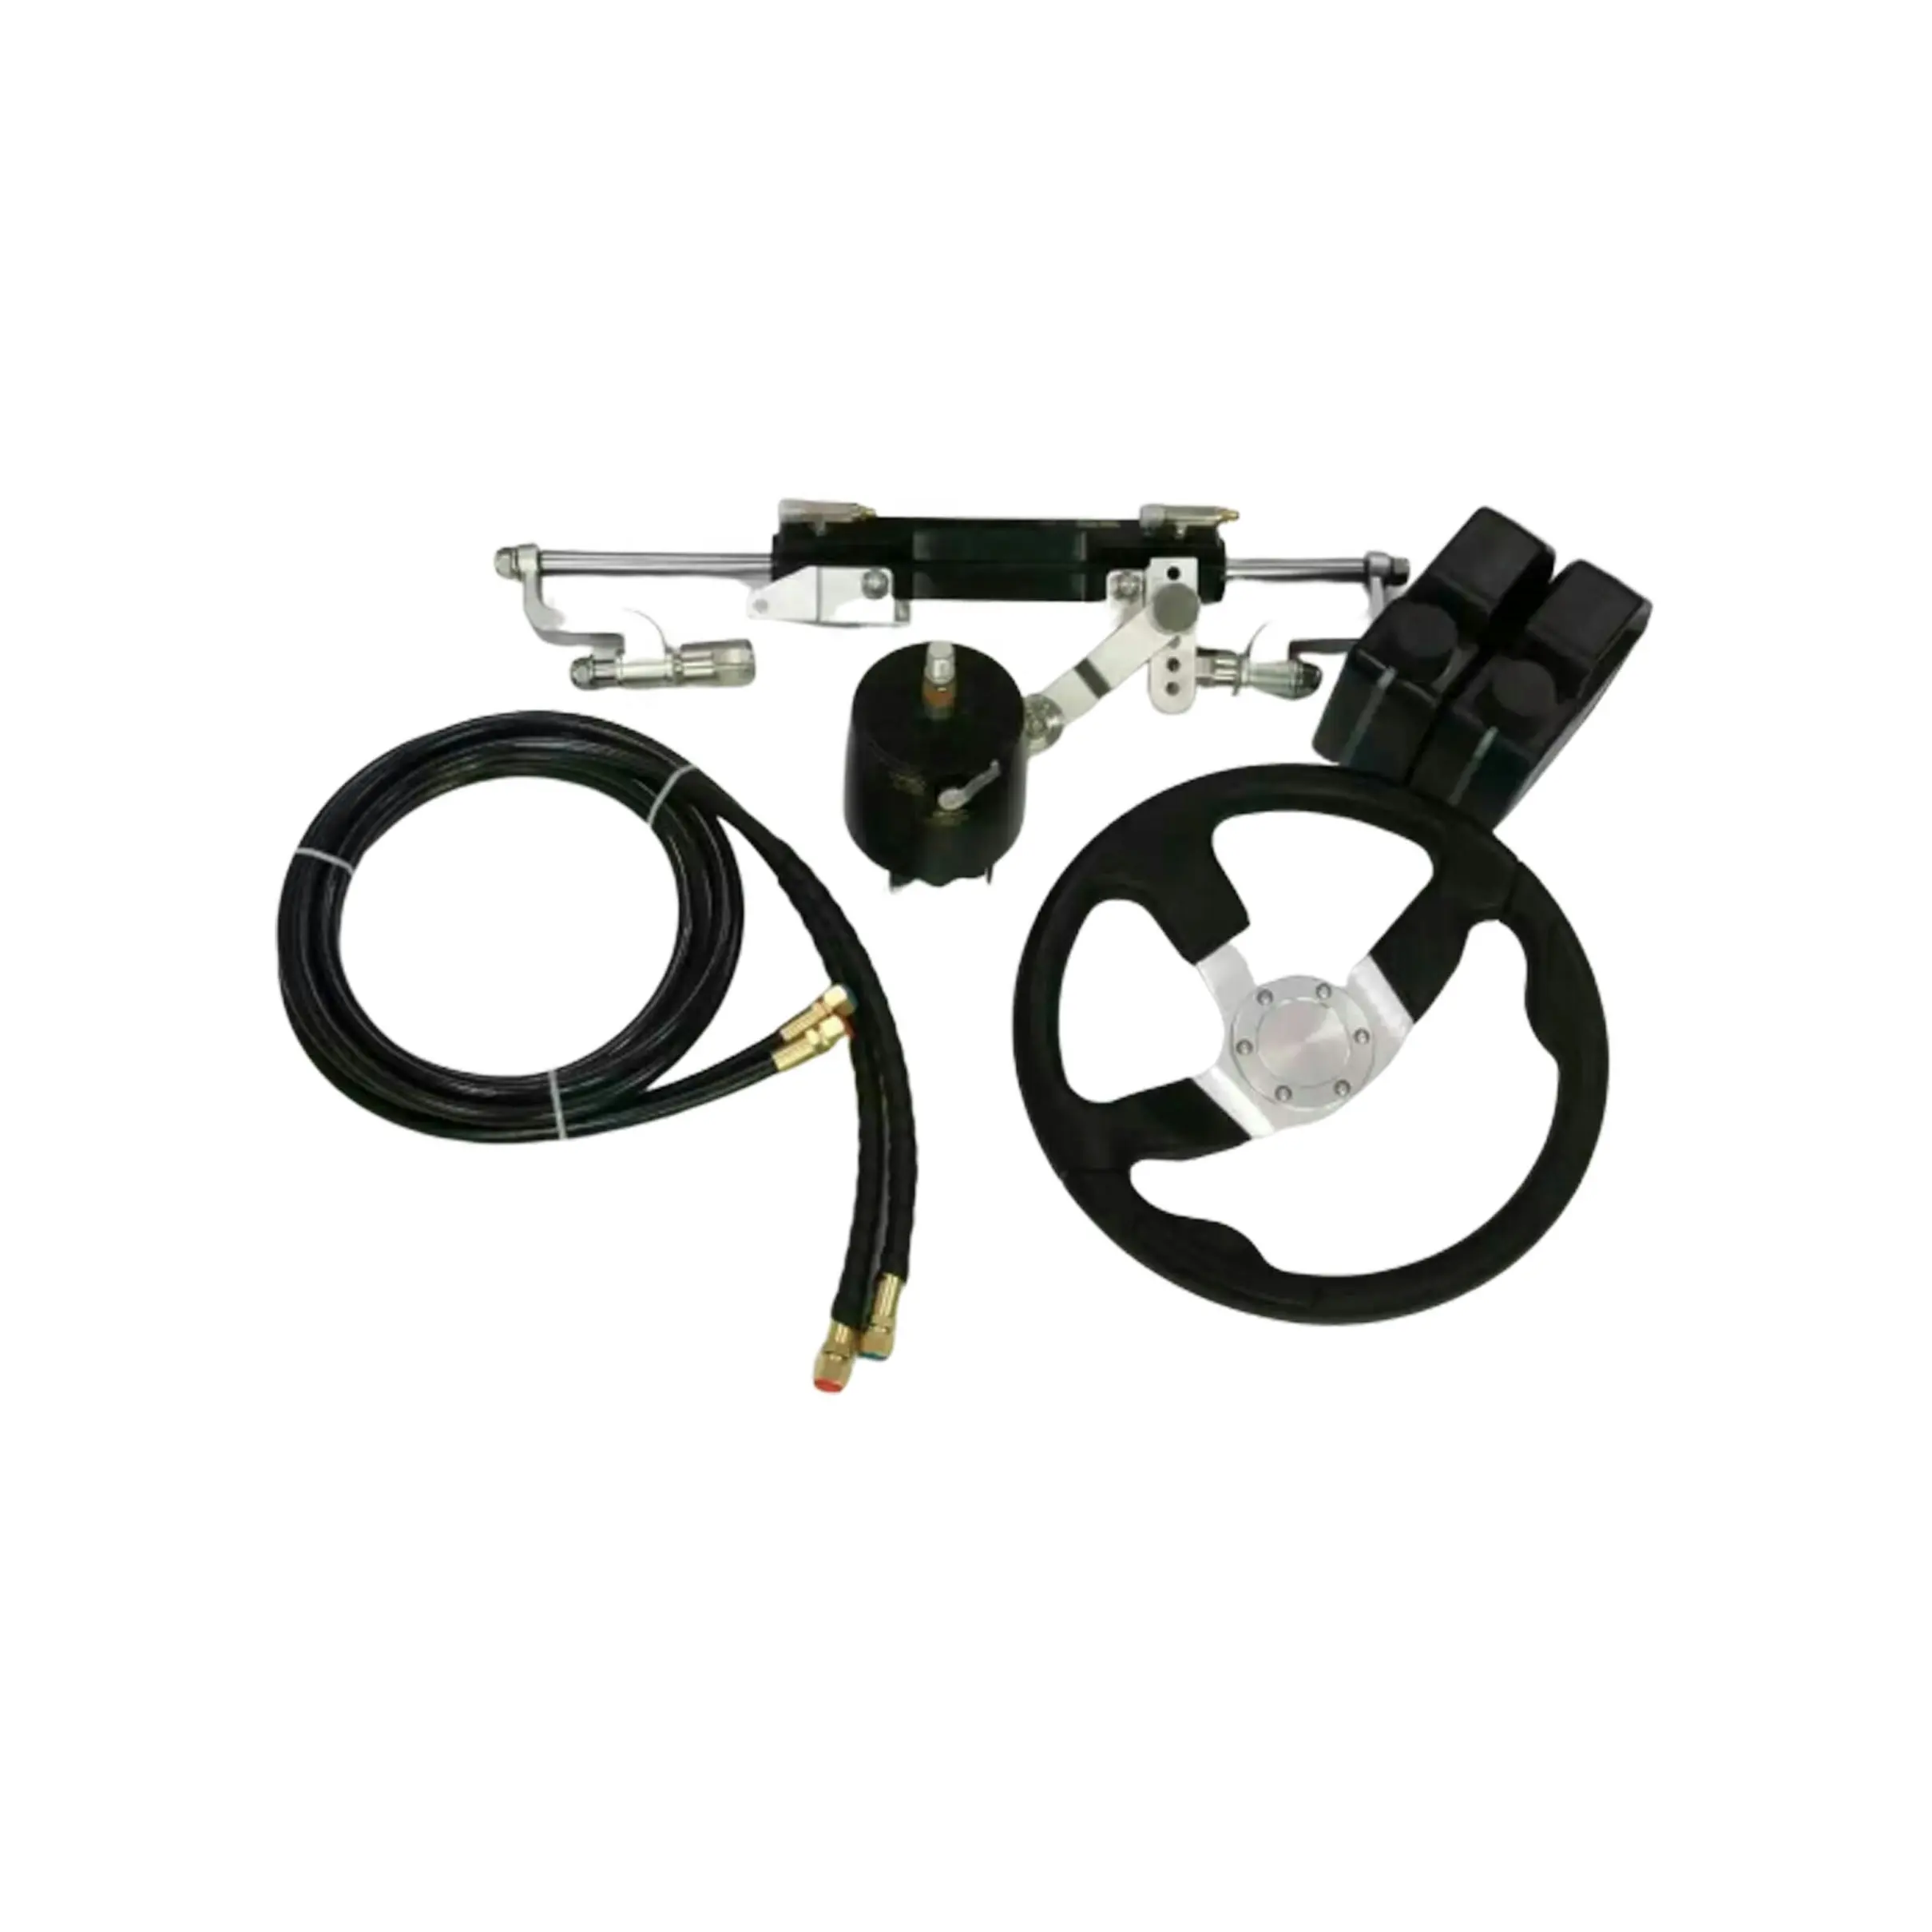 Outboard engine hydraulic steering system, hydraulic steering system 90hp for yacht